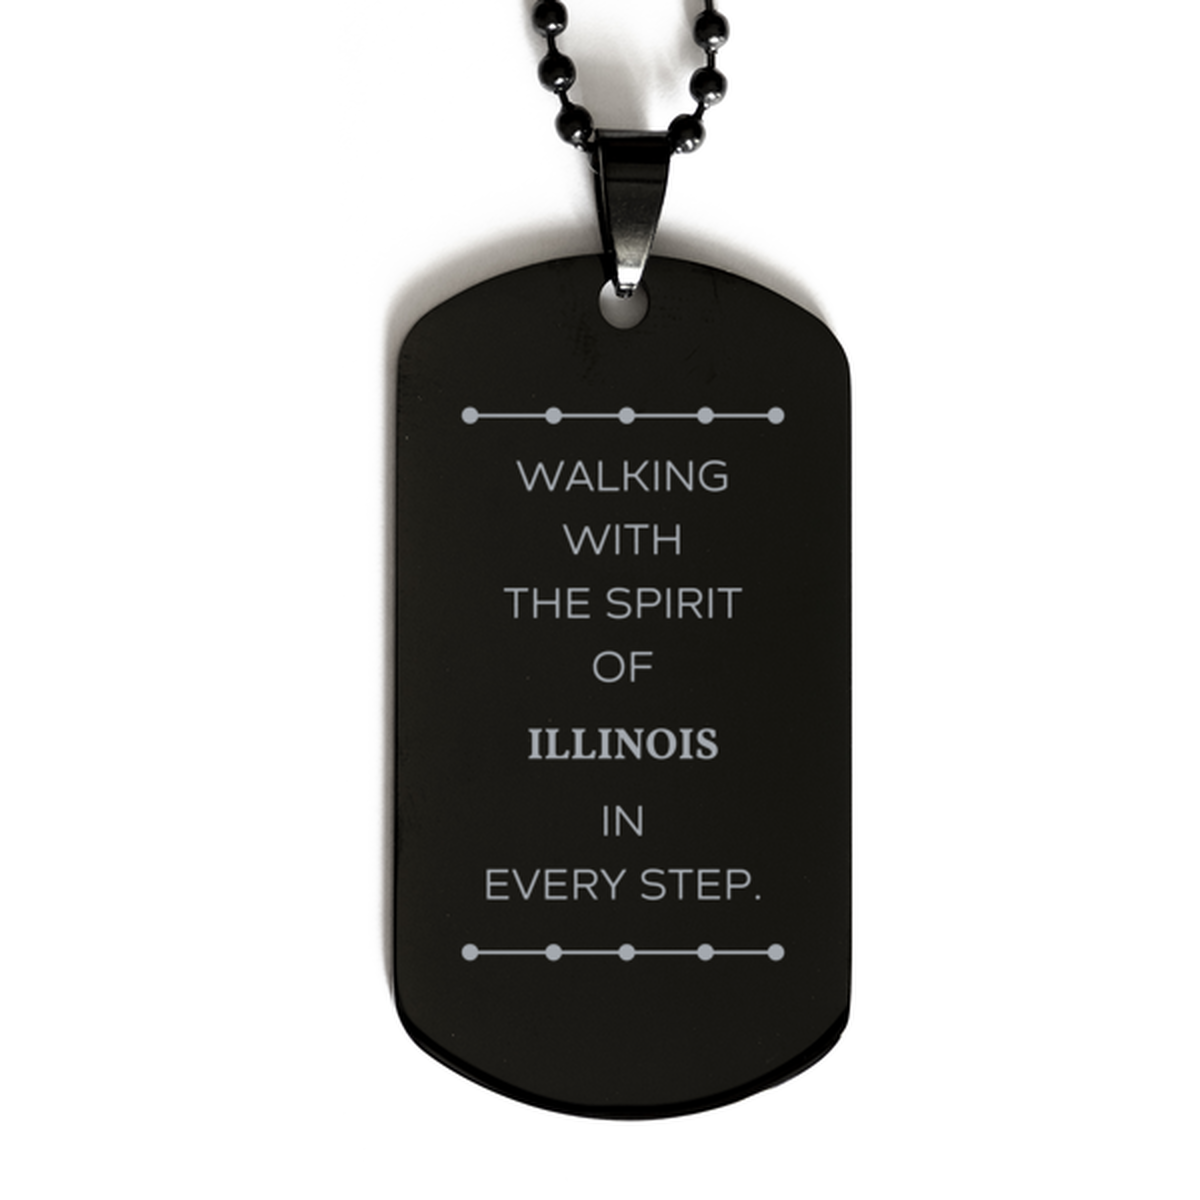 Illinois Gifts, Walking with the spirit, Love Illinois Birthday Christmas Black Dog Tag For Illinois People, Men, Women, Friends